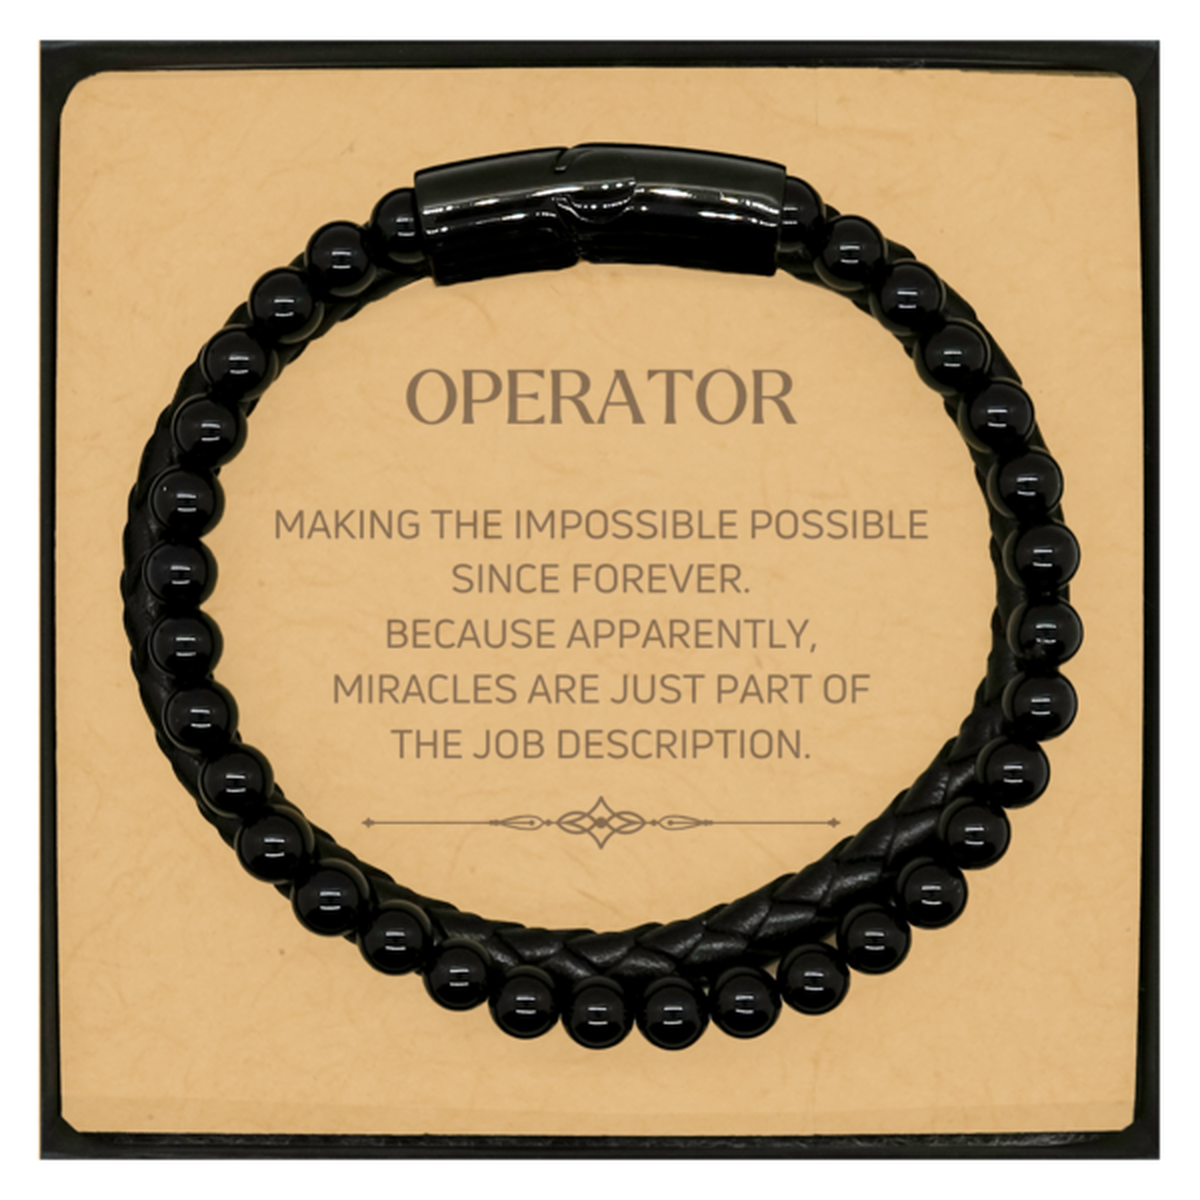 Funny Operator Gifts, Miracles are just part of the job description, Inspirational Birthday Christmas Stone Leather Bracelets For Operator, Men, Women, Coworkers, Friends, Boss